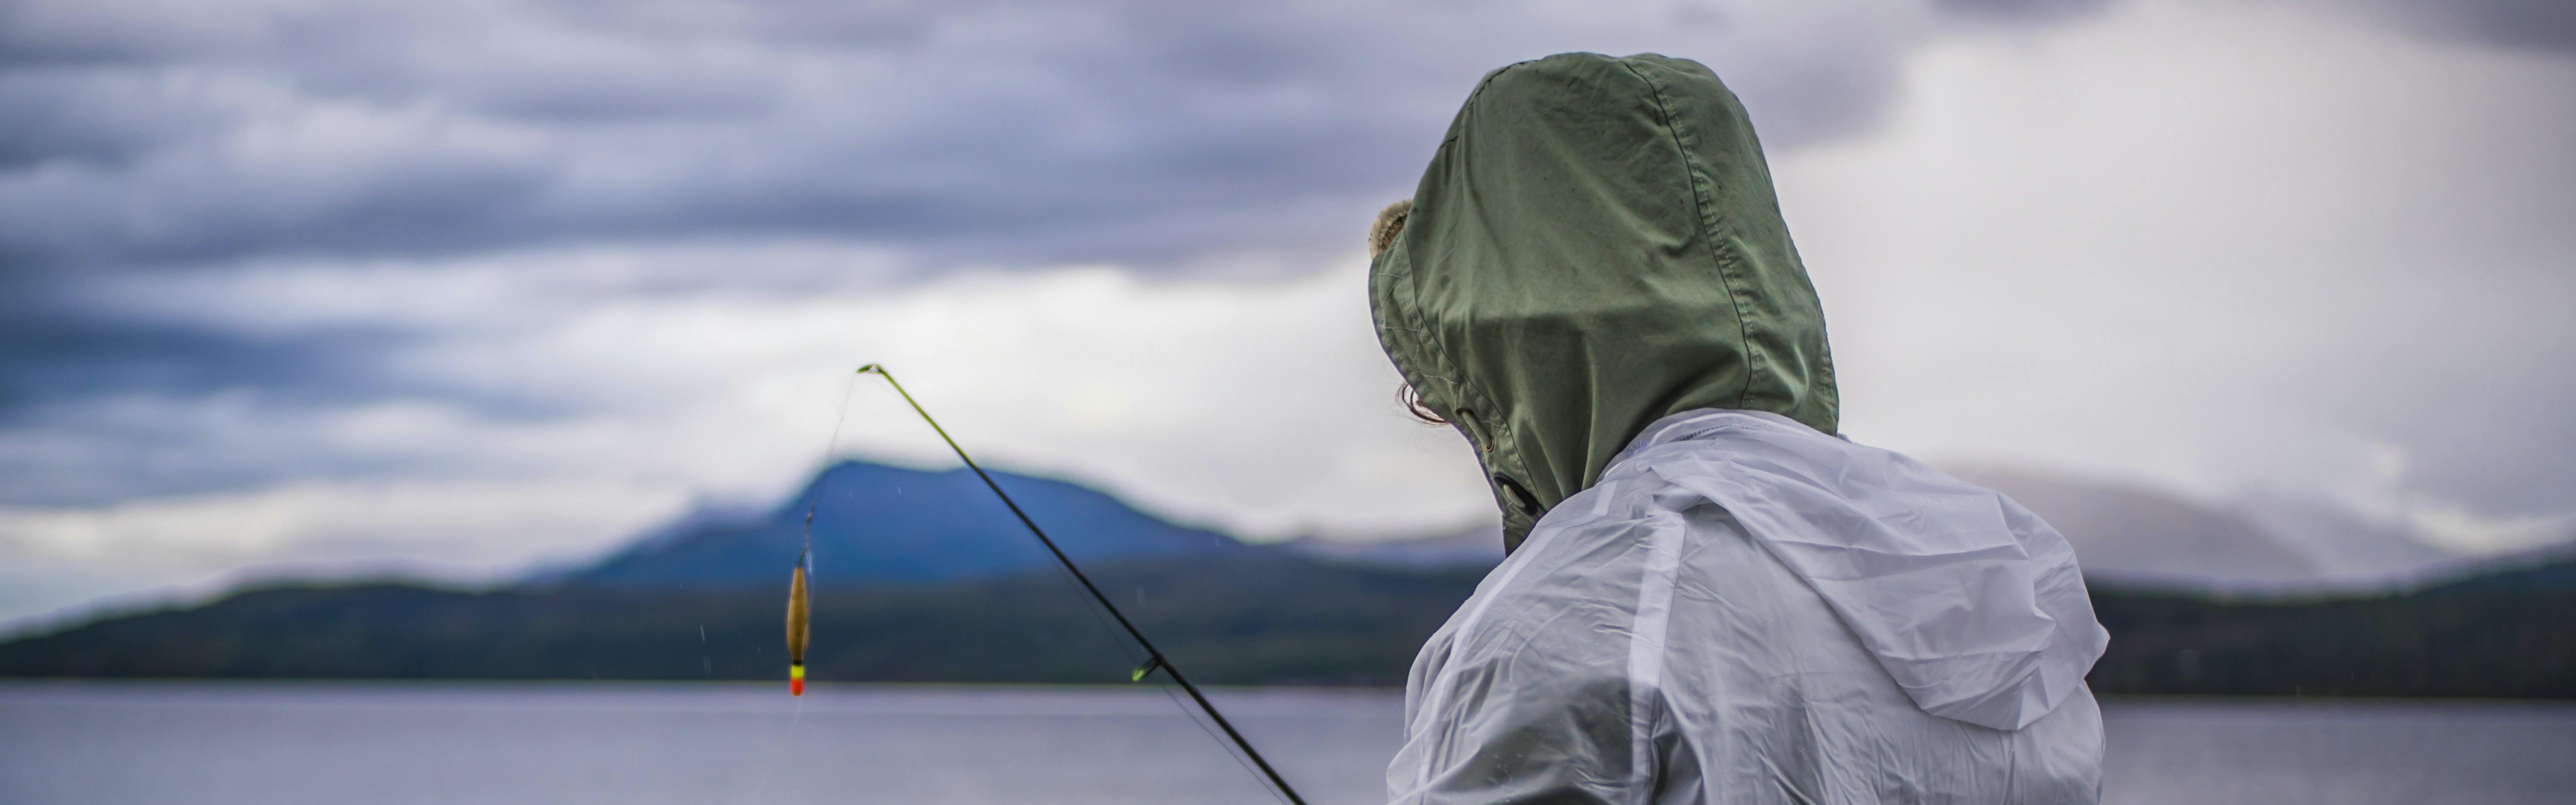 Someone fishes while wearing two raincoats. 